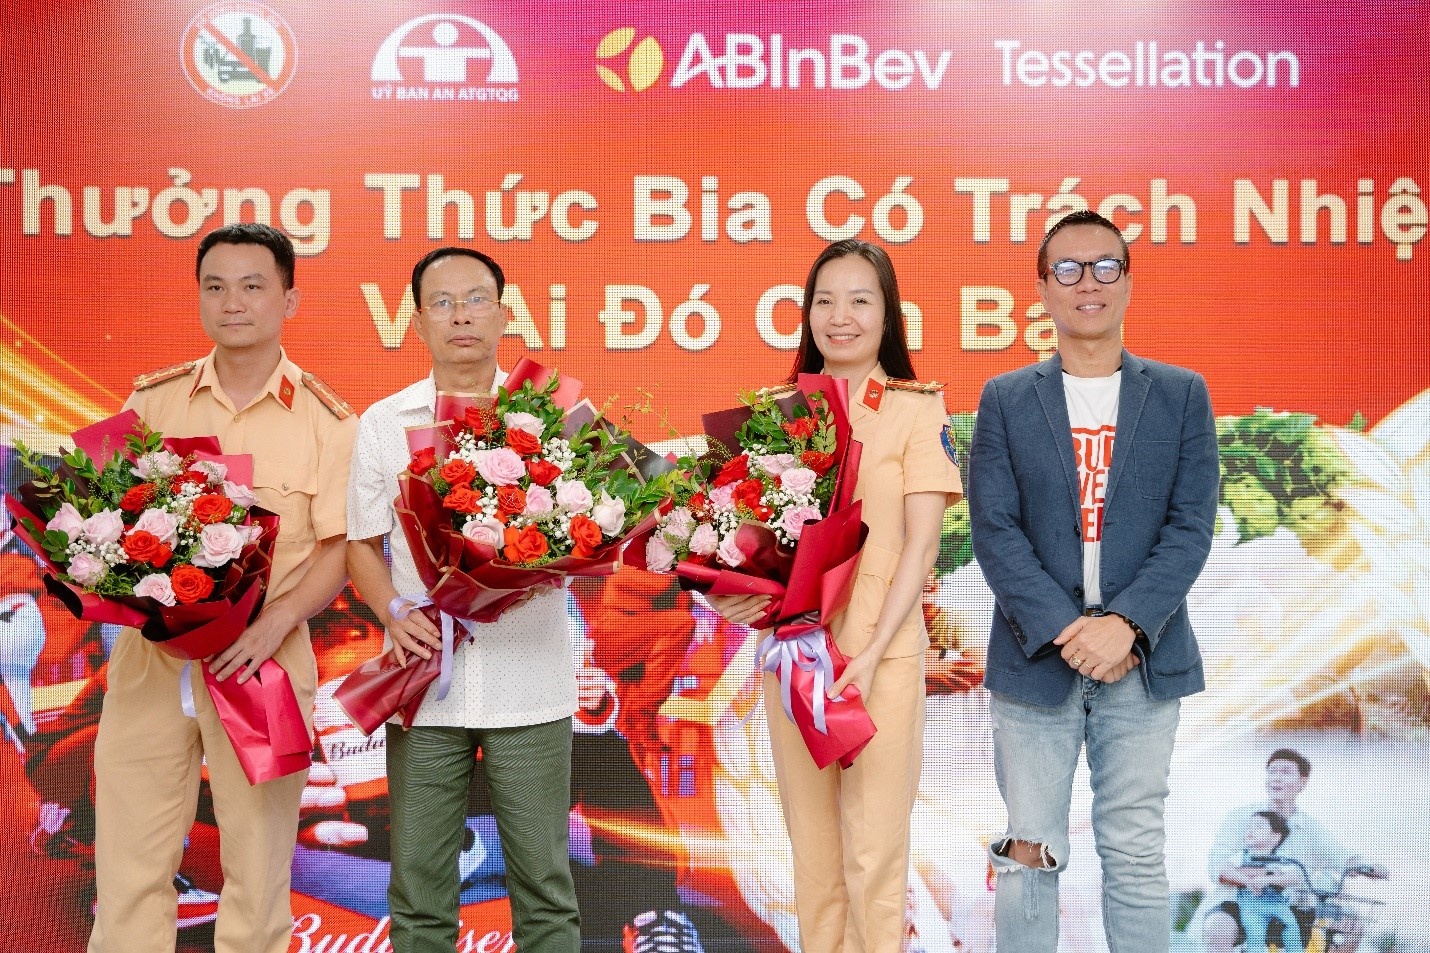 AB InBev continues to promote Global Smart Drinking culture in Hoa Binh